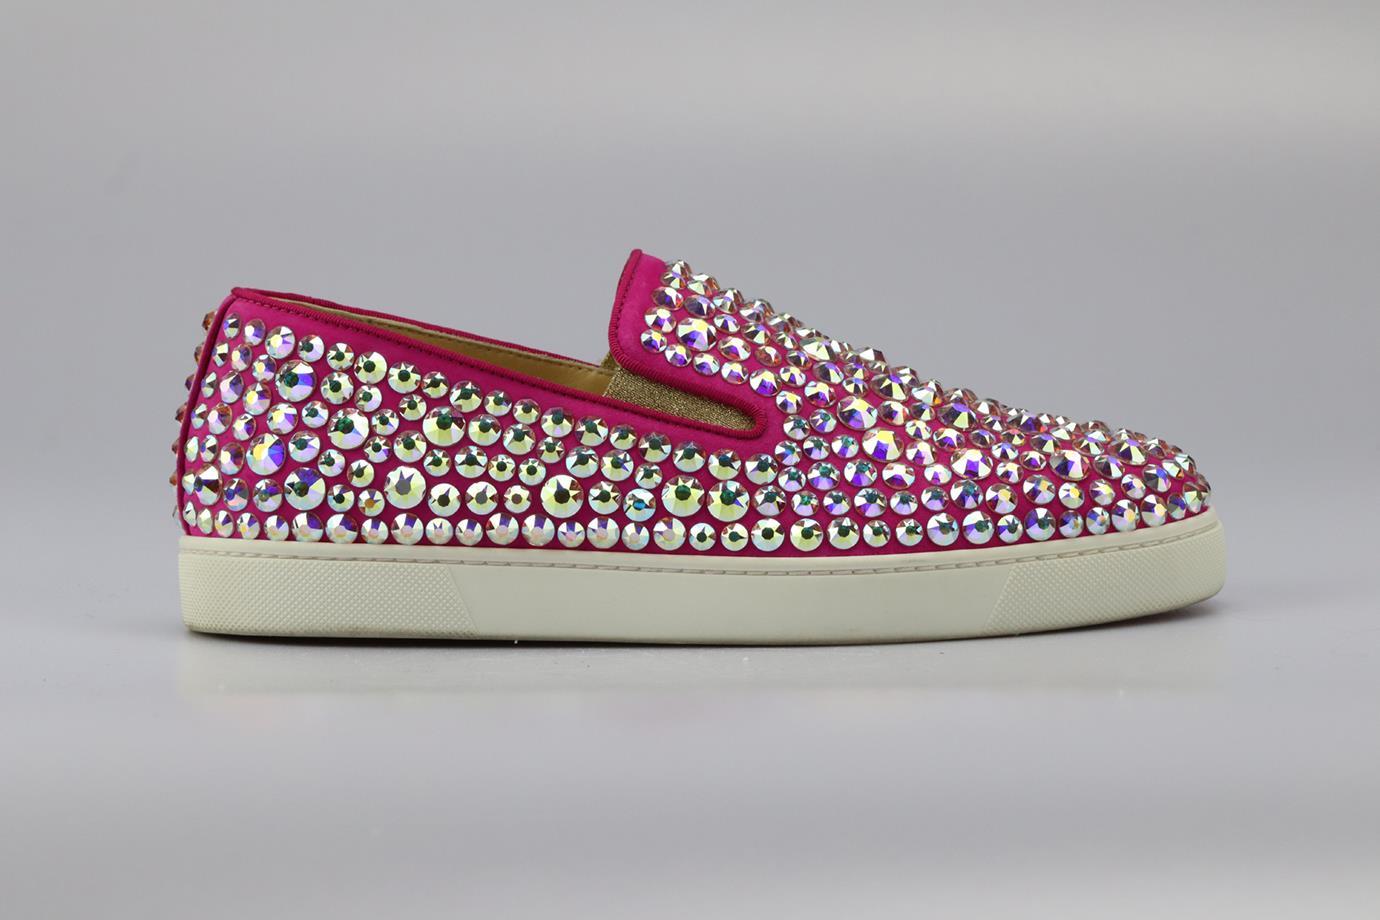 Christian Louboutin Crystal Embellished Suede Slip On Sneakers. Pink. Slips on. Does not come with - dustbag or box. EU 40 (UK 7, US 10). Insole: 10.6 in. Heel height: 1 in. Condition: Used. Very good condition - Some wear to soles; see pictures.